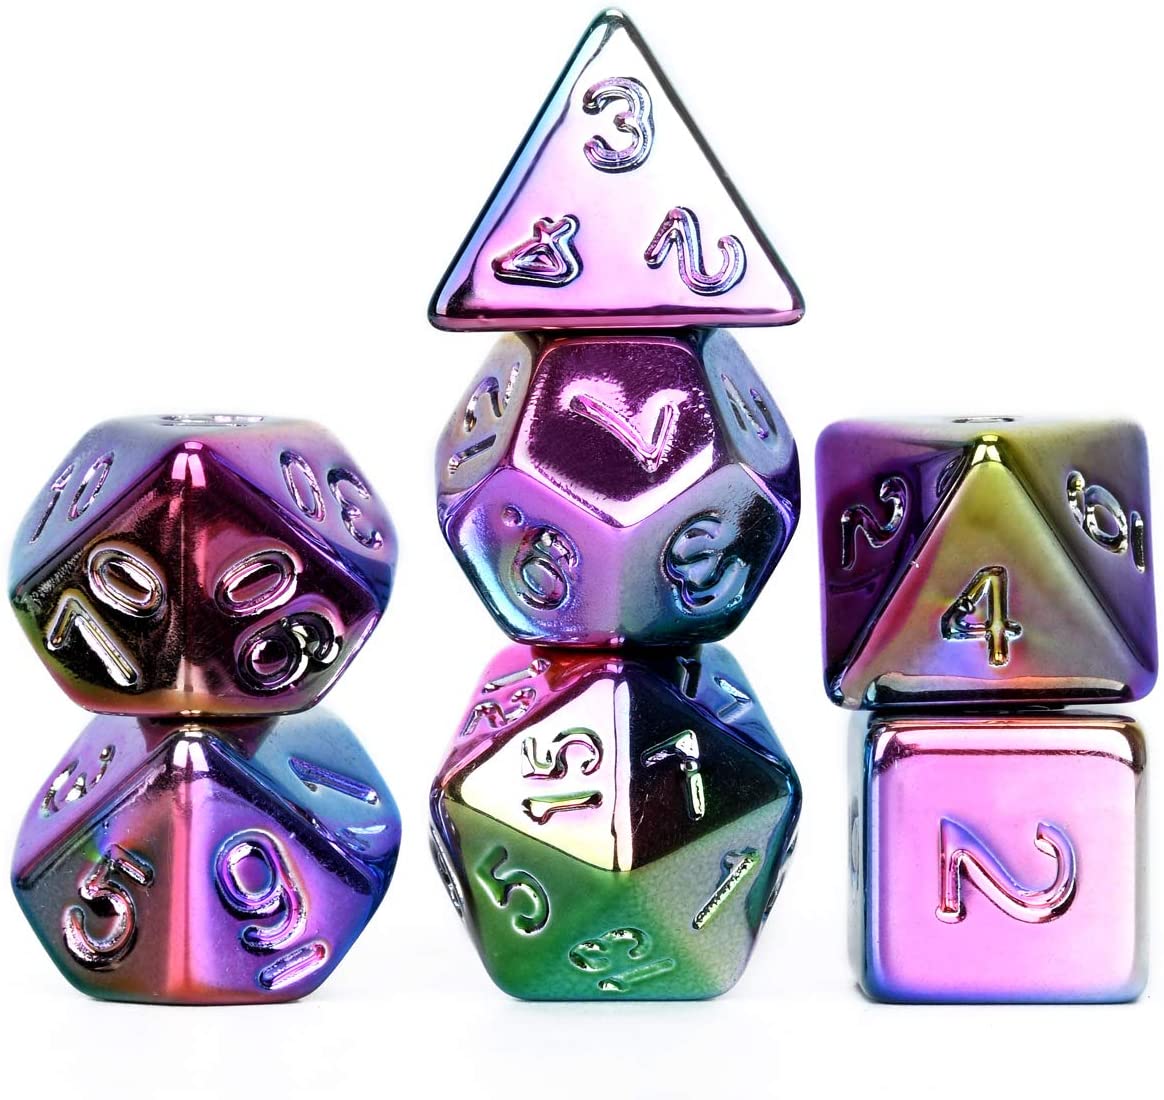 7 RPG Roleplaying Game Dice Dungeons & Dragons D and D Many Sets to Choose From! 